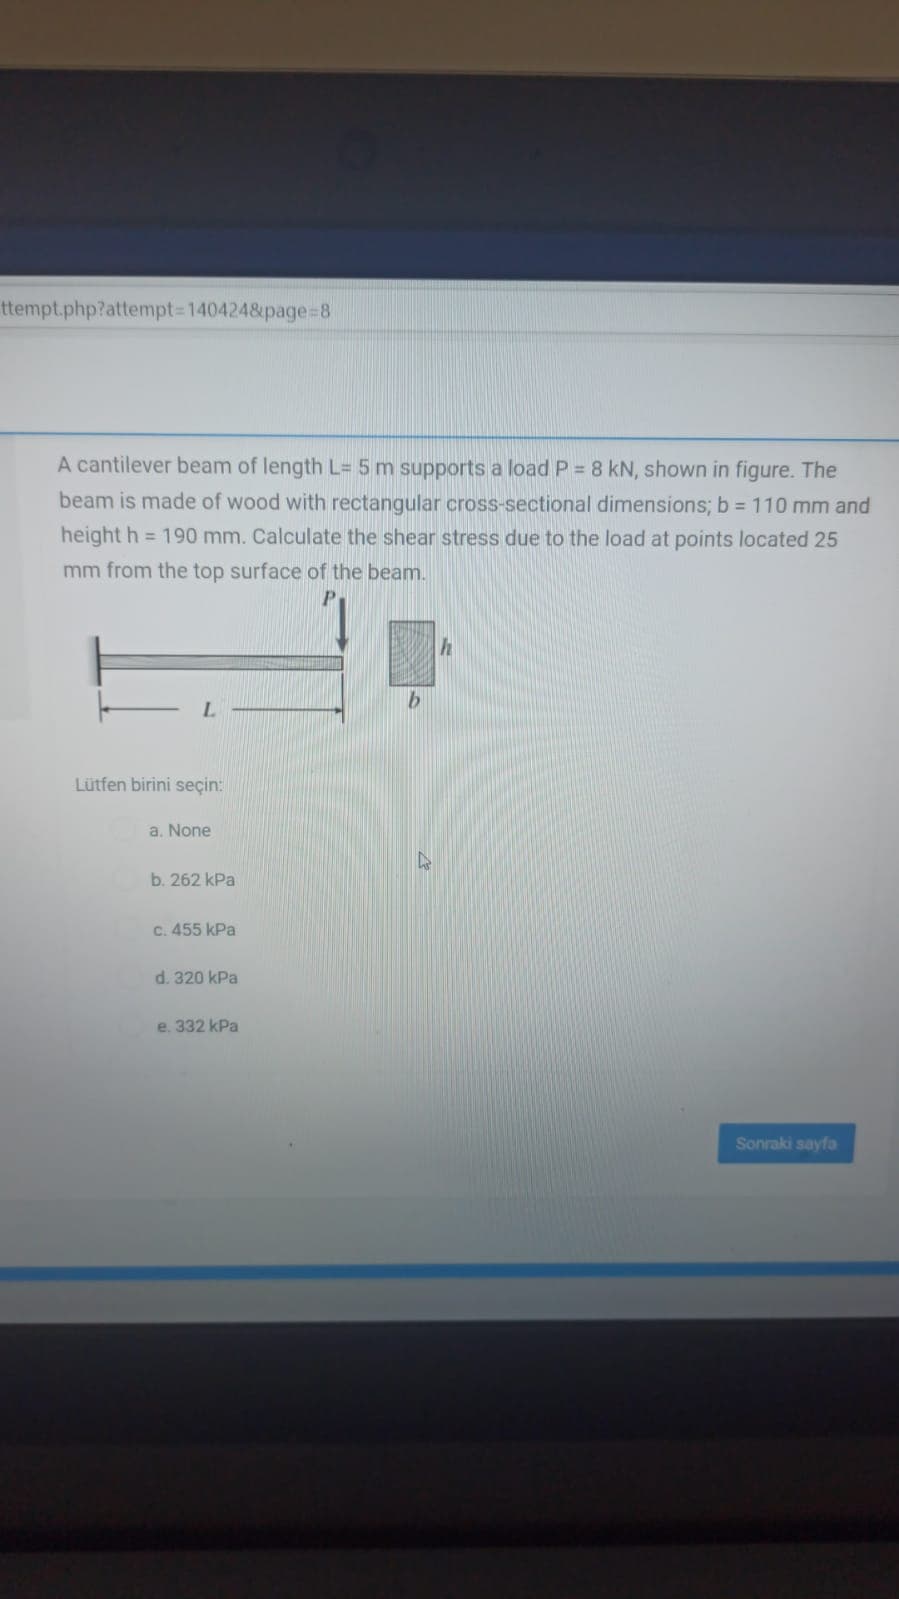 ttempt.php?attempt3D1404248&page=8
A cantilever beam of length L= 5 m supports a load P = 8 kN, shown in figure. The
beam is made of wood with rectangular cross-sectional dimensions; b = 110 mm and
height h = 190 mm. Calculate the shear stress due to the load at points located 25
mm from the top surface of the beam.
L.
Lütfen birini seçin:
a. None
b. 262 kPa
C. 455 kPa
d. 320 kPa
e. 332 kPa
Sonraki sayfa
